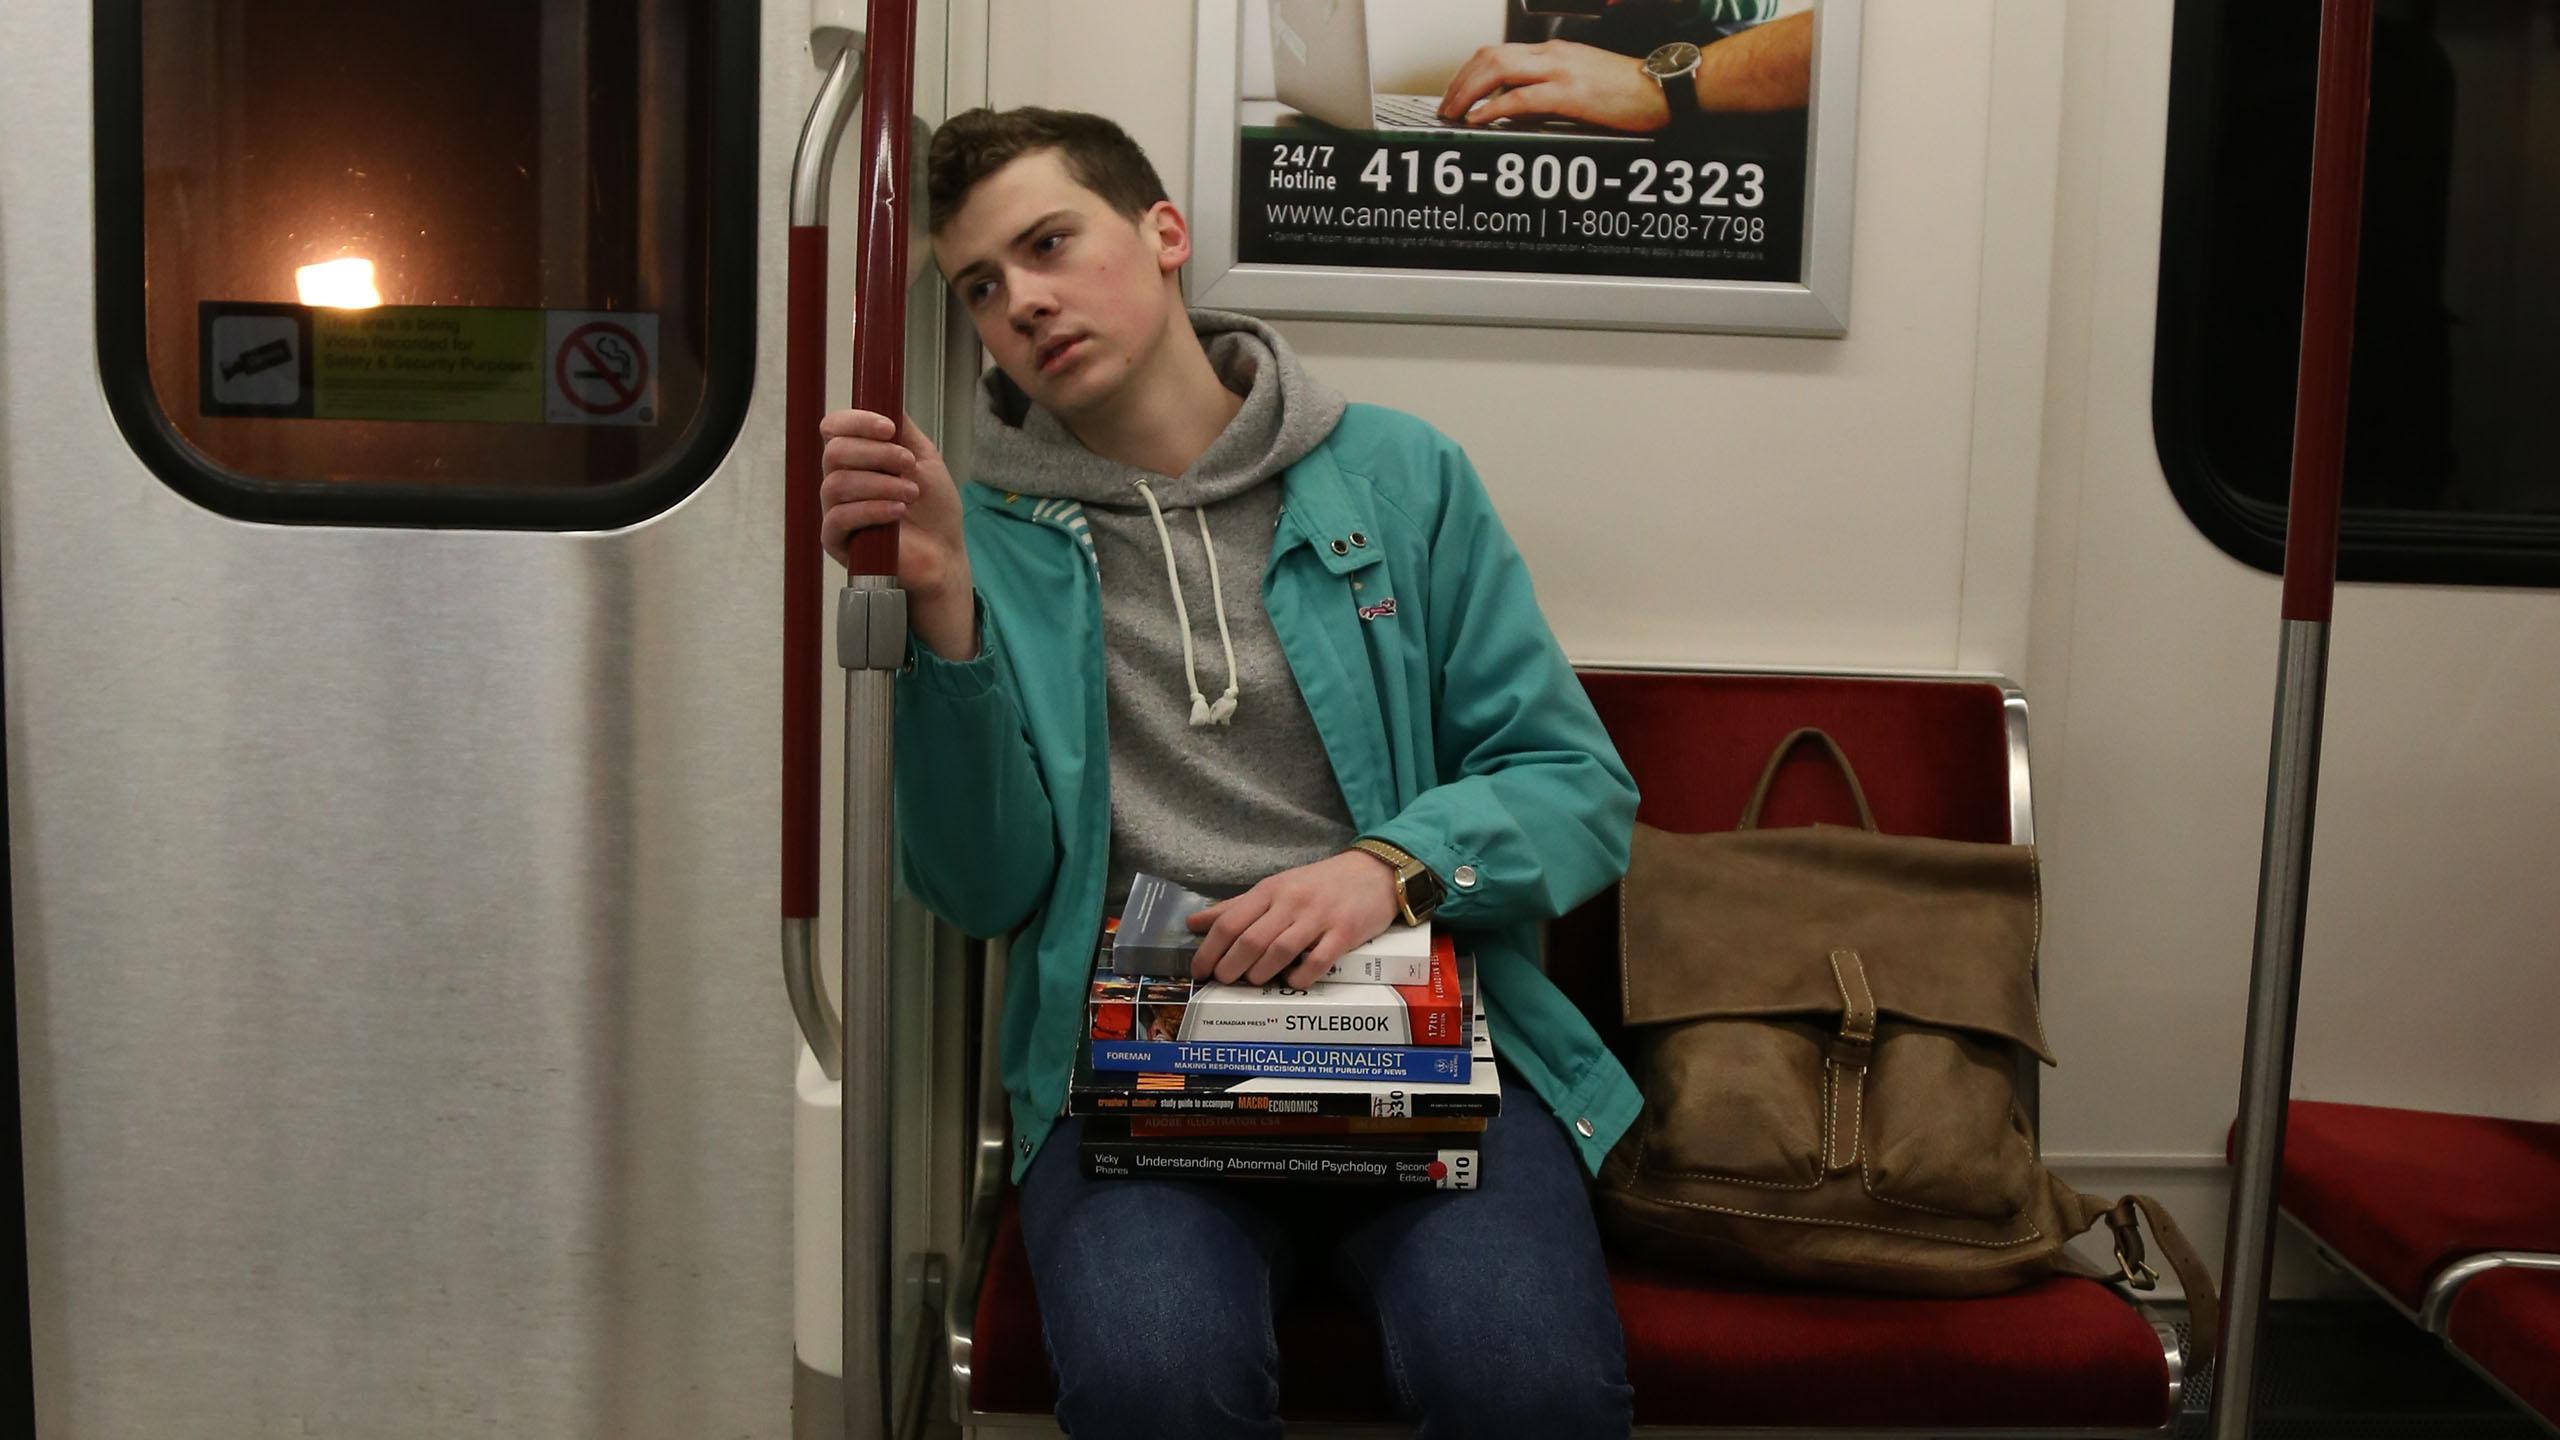 A student commuter sits in a subway car, looking exhausted